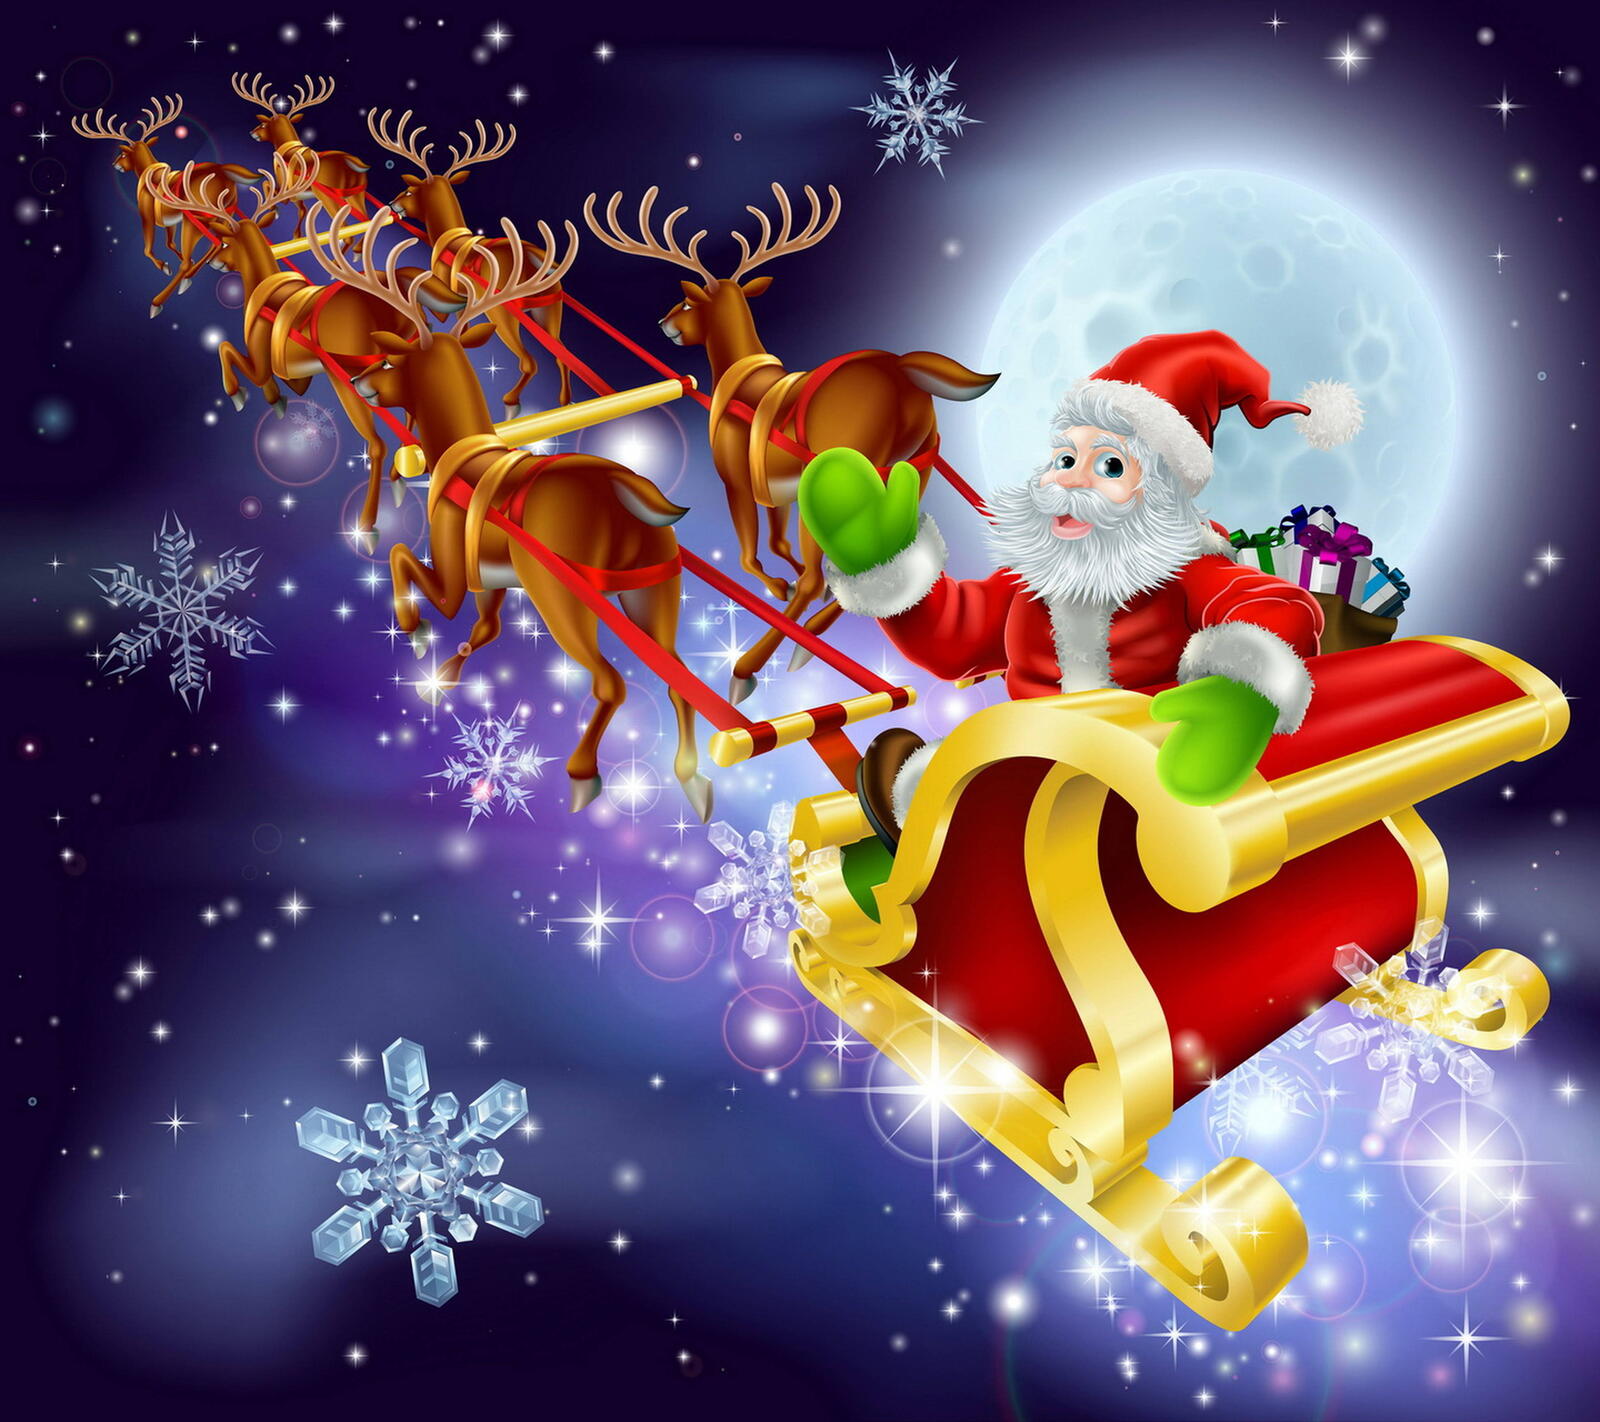 Wallpapers elements Christmas decoration new year on the desktop